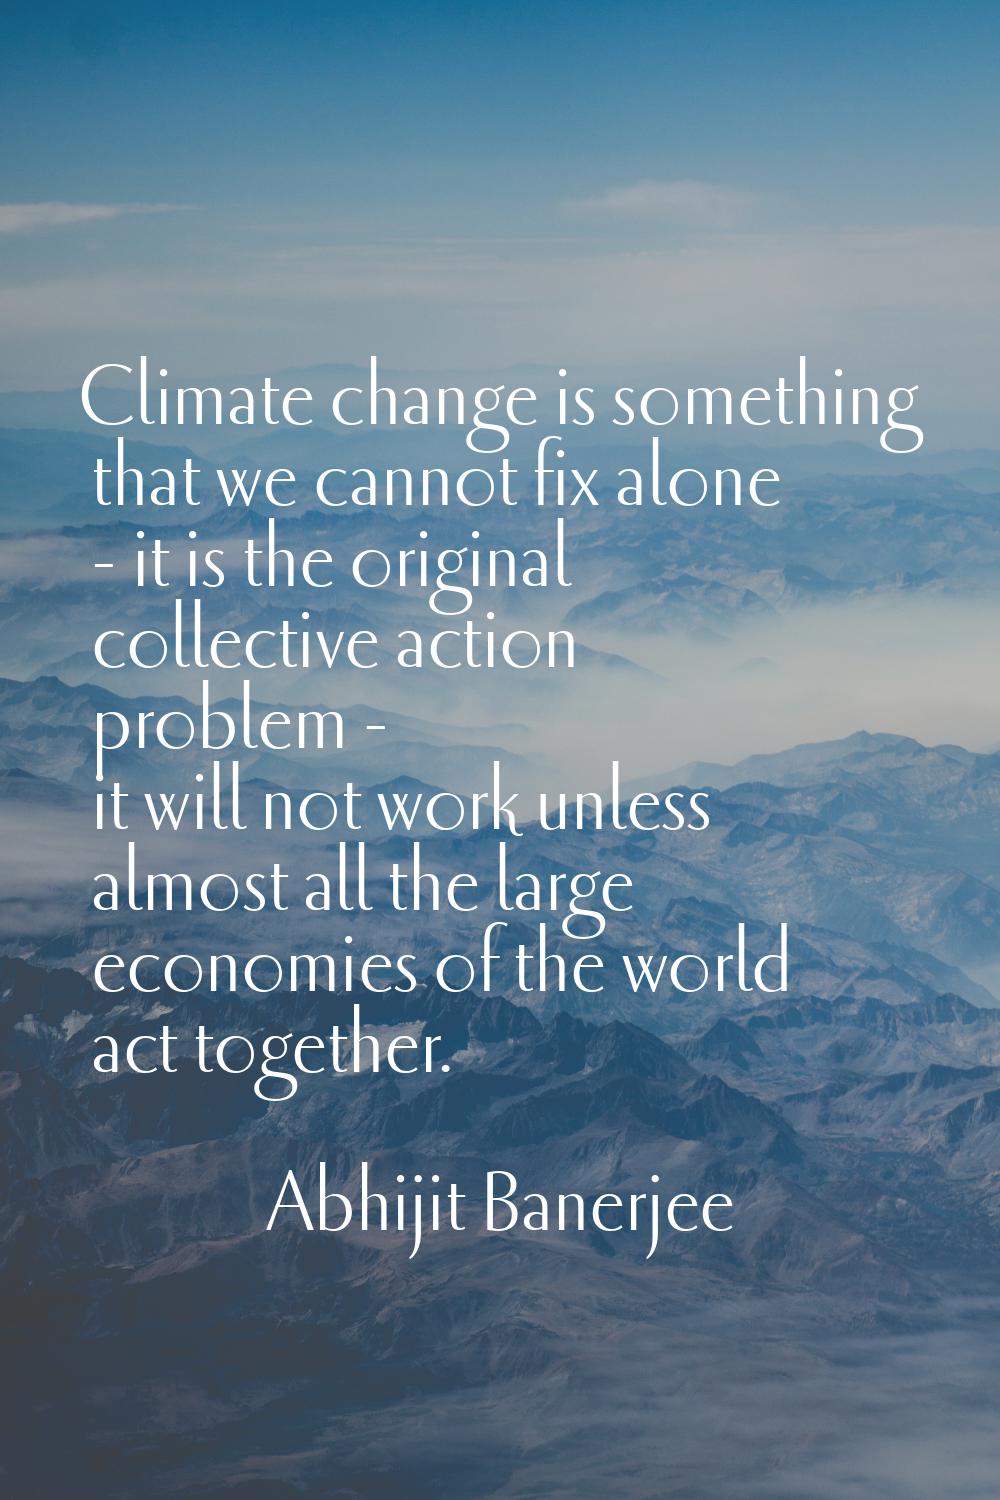 Climate change is something that we cannot fix alone - it is the original collective action problem